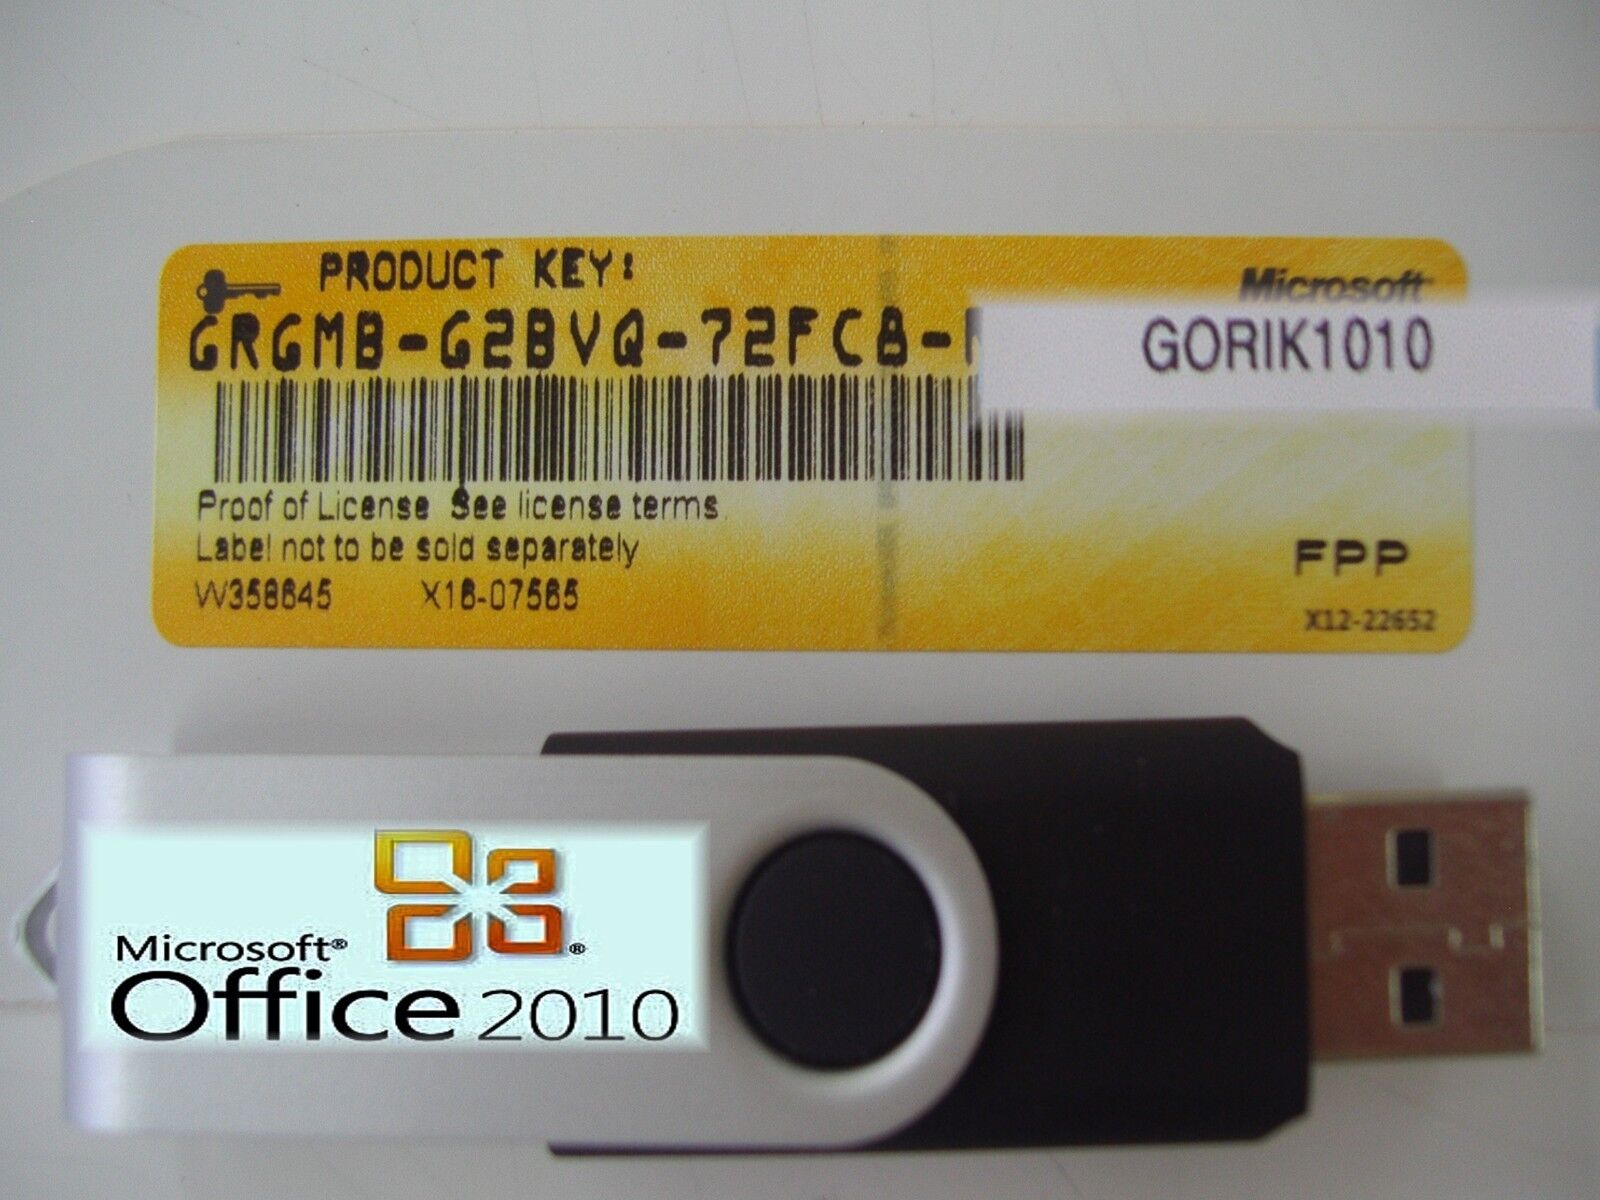 Microsoft Office 2010 Professional Licensed for 2 PCs Full English MS Pro.